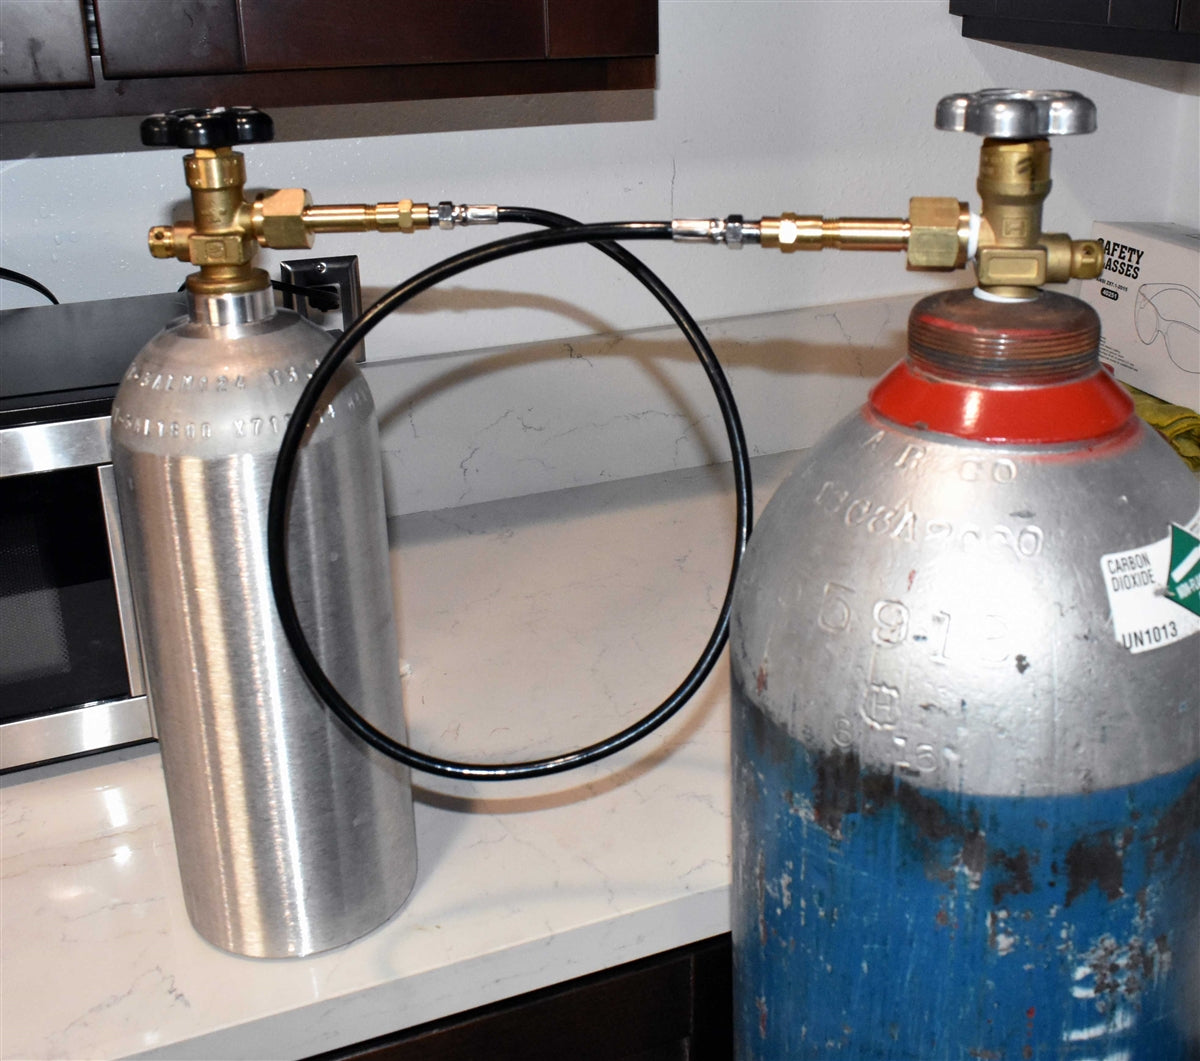 Co2 fill hose for beer brewing wine hydroponics airbrush tea aquarium and keg Co2 tanks.